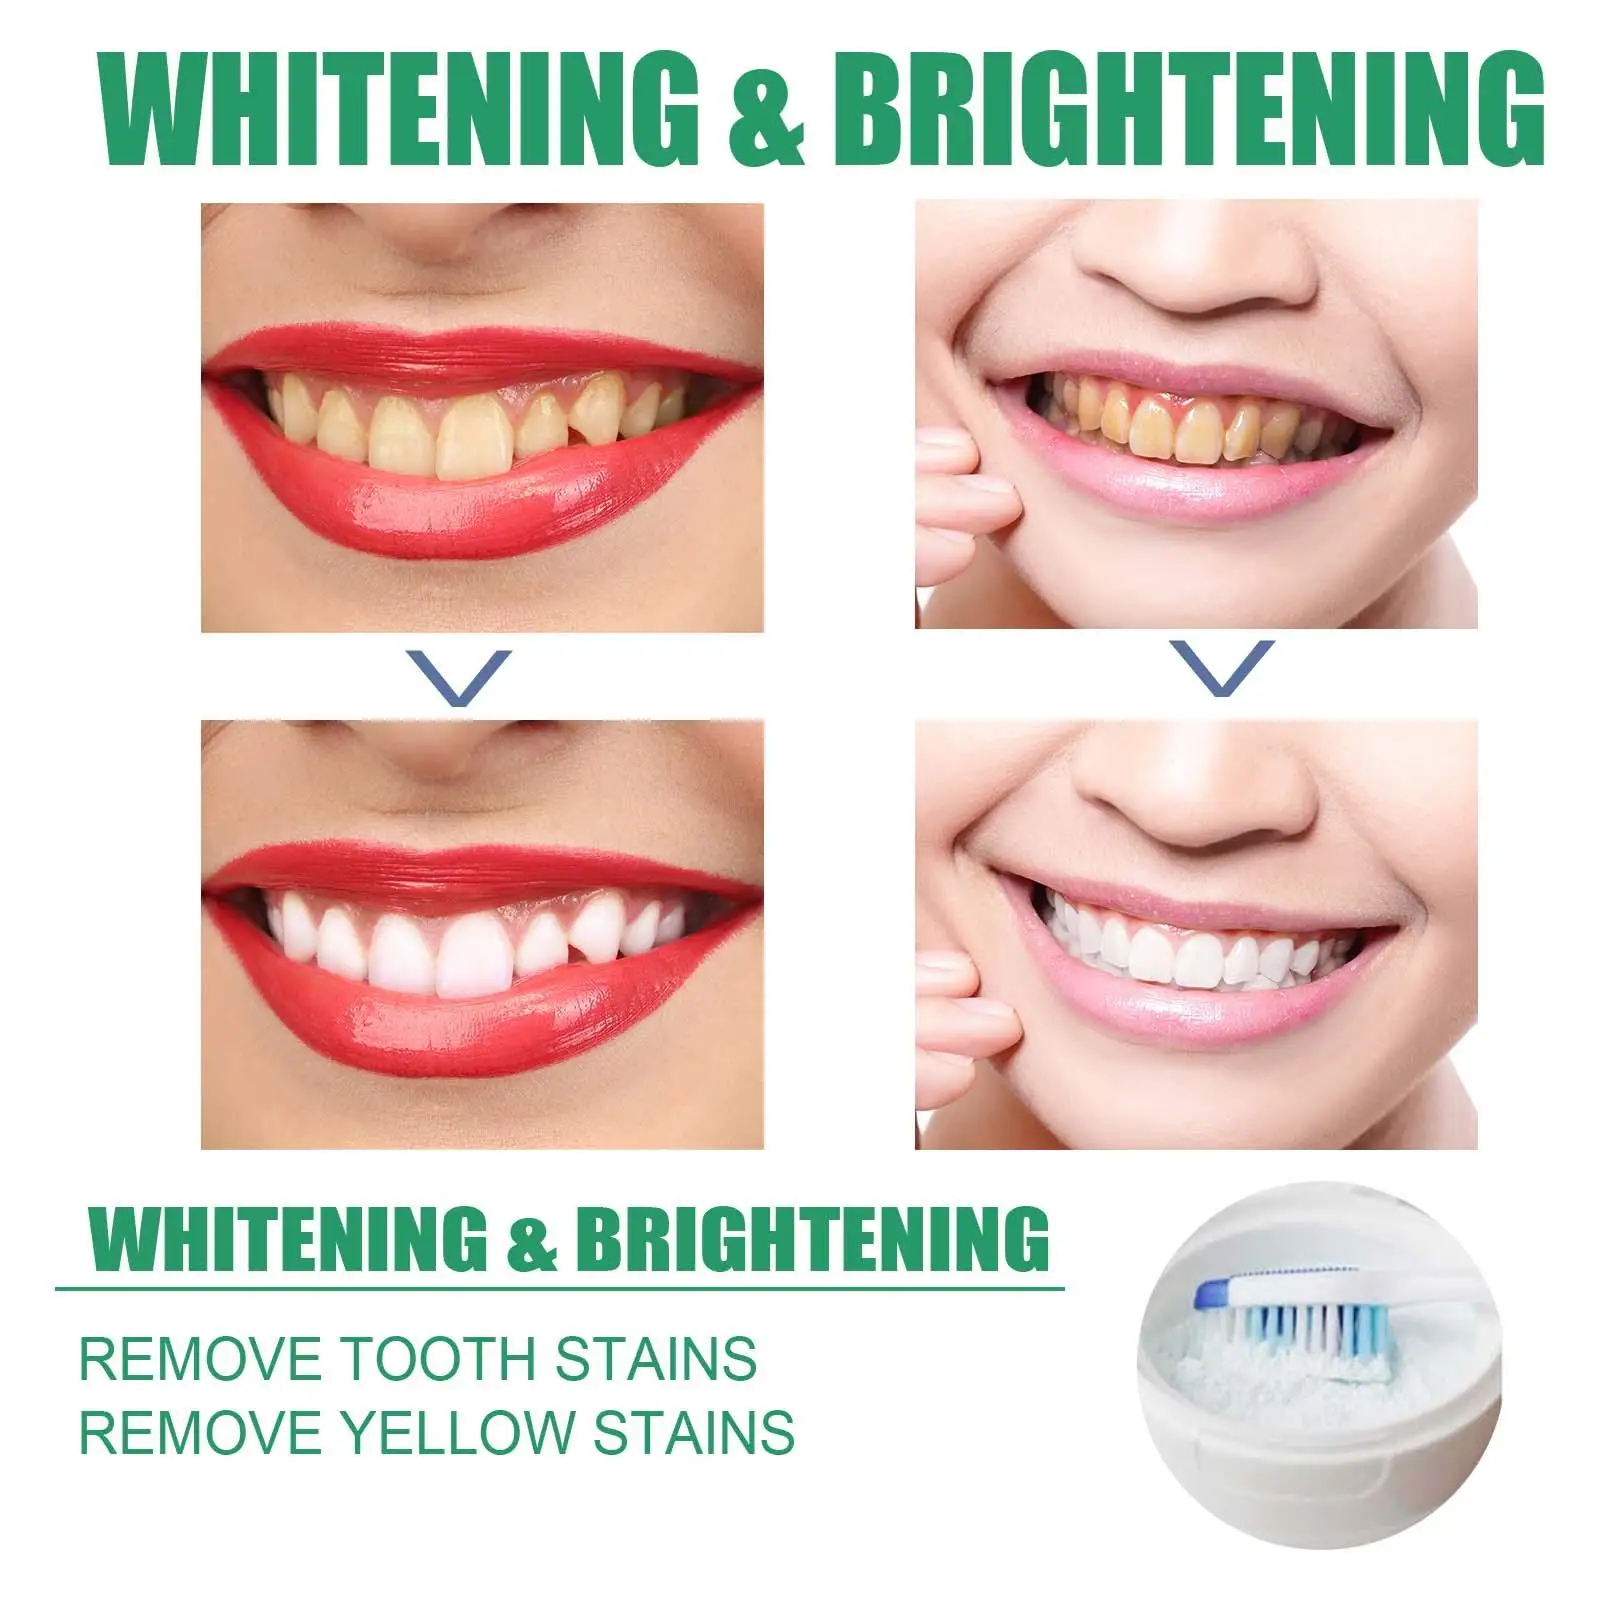 7days Tooth Whitening Tooth Powder Remove Smoke Stains Coffee Stains Tea Stains Freshen Bad Breath Teeth Cleaning Powder images - 6